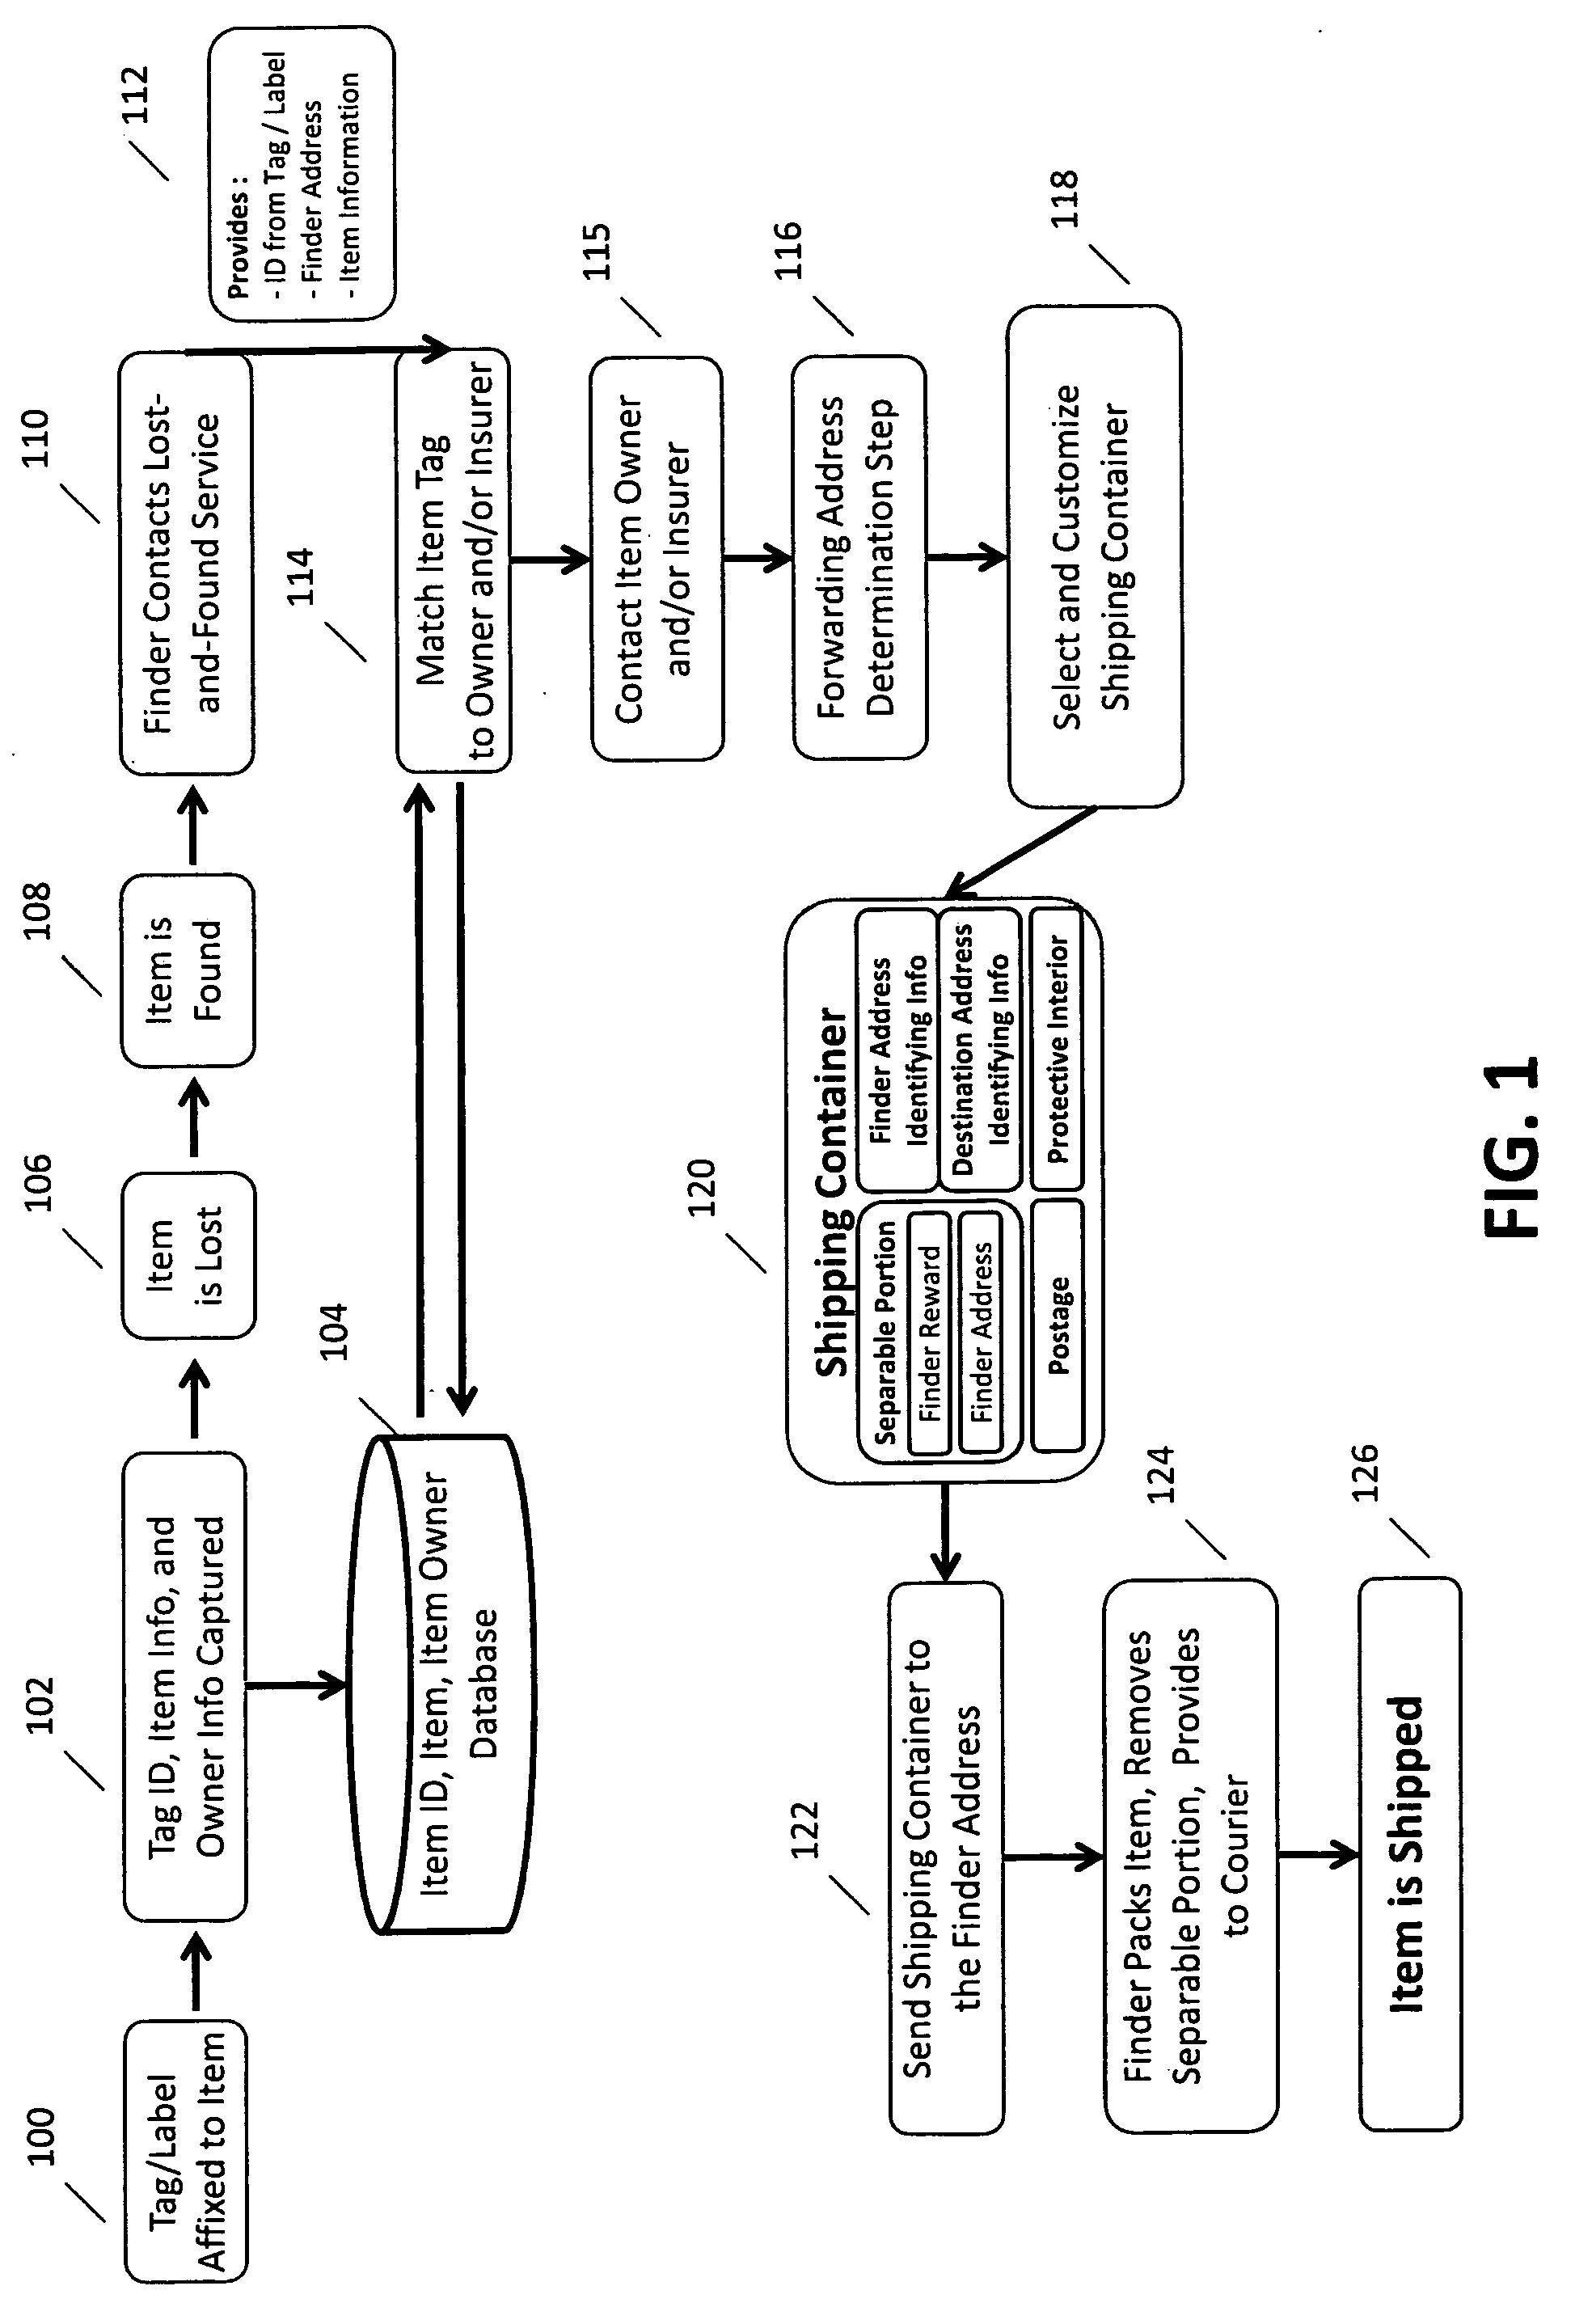 System for providing insurance associated with a lost-and-found service